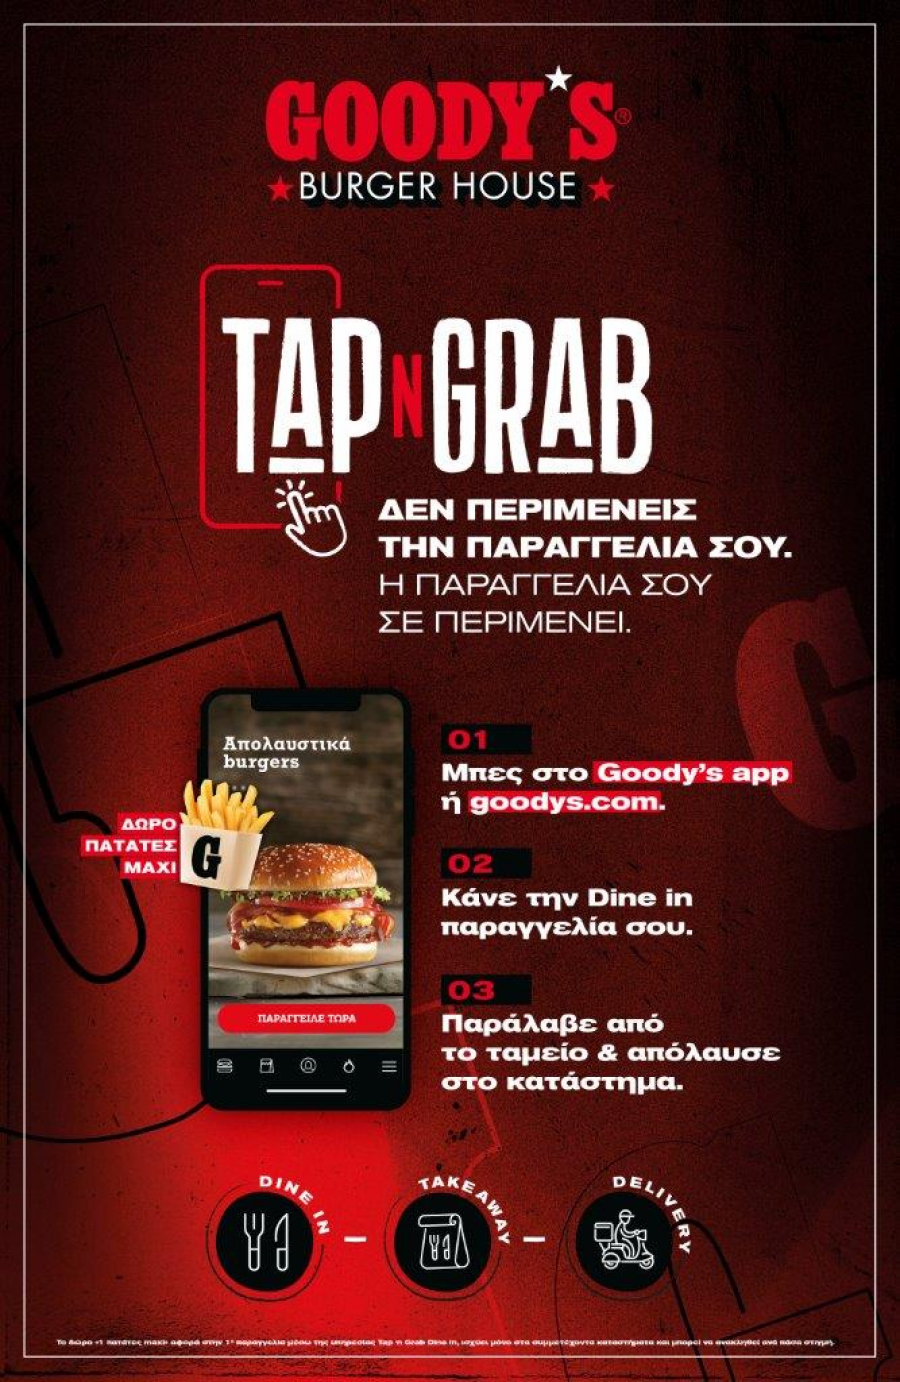 Goody's Burger House: Νέα υπηρεσία Tap ‘N Grab Dine-in